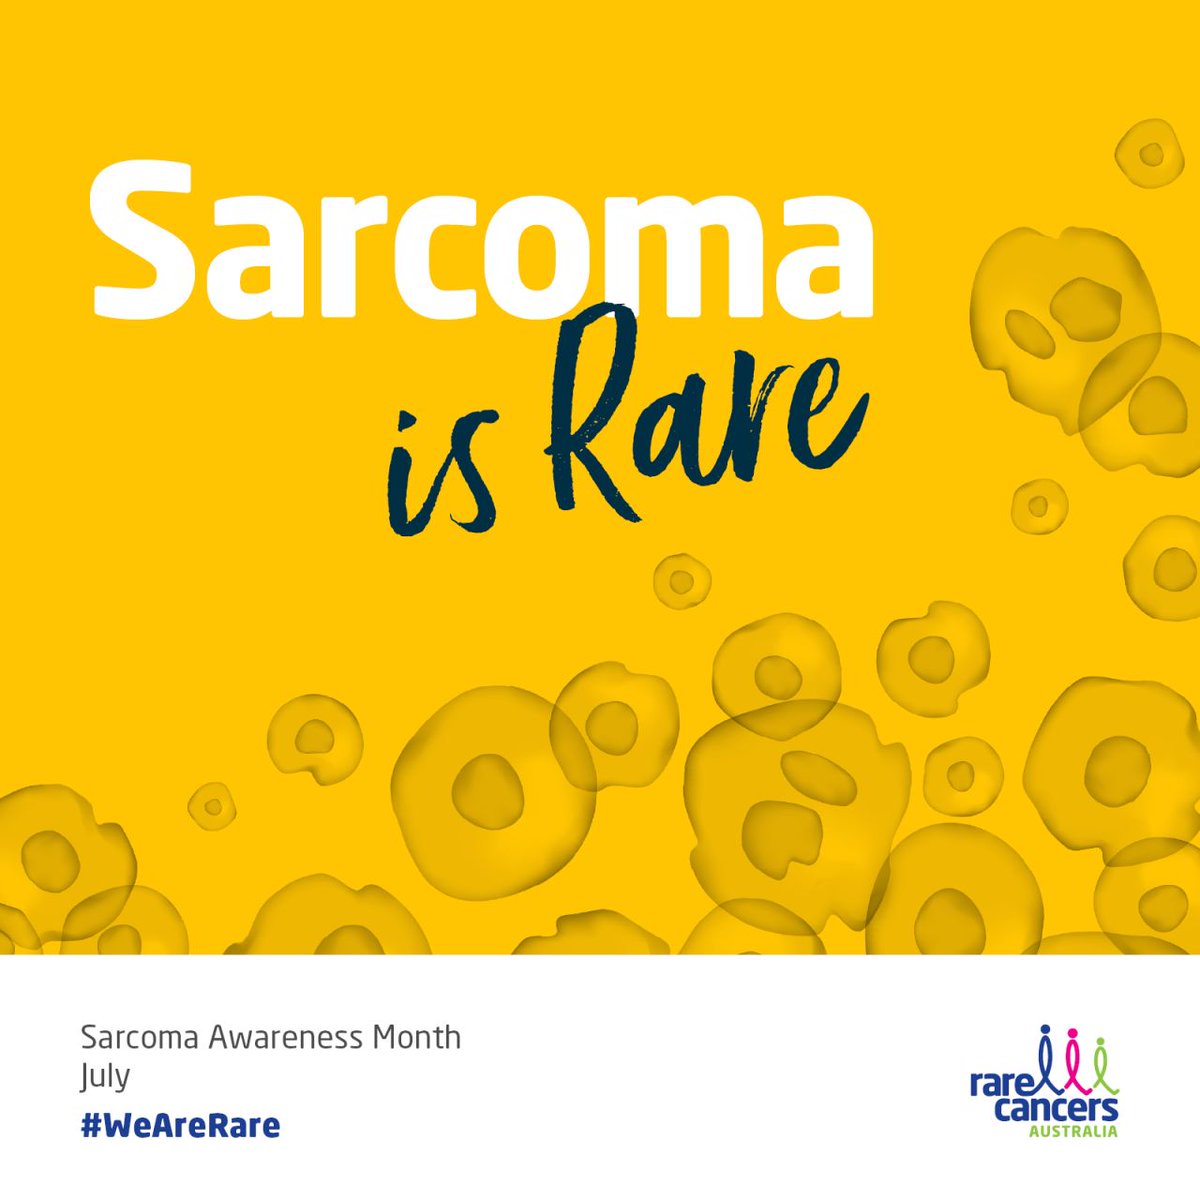 Sarcoma accounts for 20% of all childhood cancers and is one of the most prevalent cancers affecting young people.

This #SarcomaAwarenessMonth, please join us in raising awareness of the importance of early cancer diagnosis and access to treatment.

#Accesstomedicines